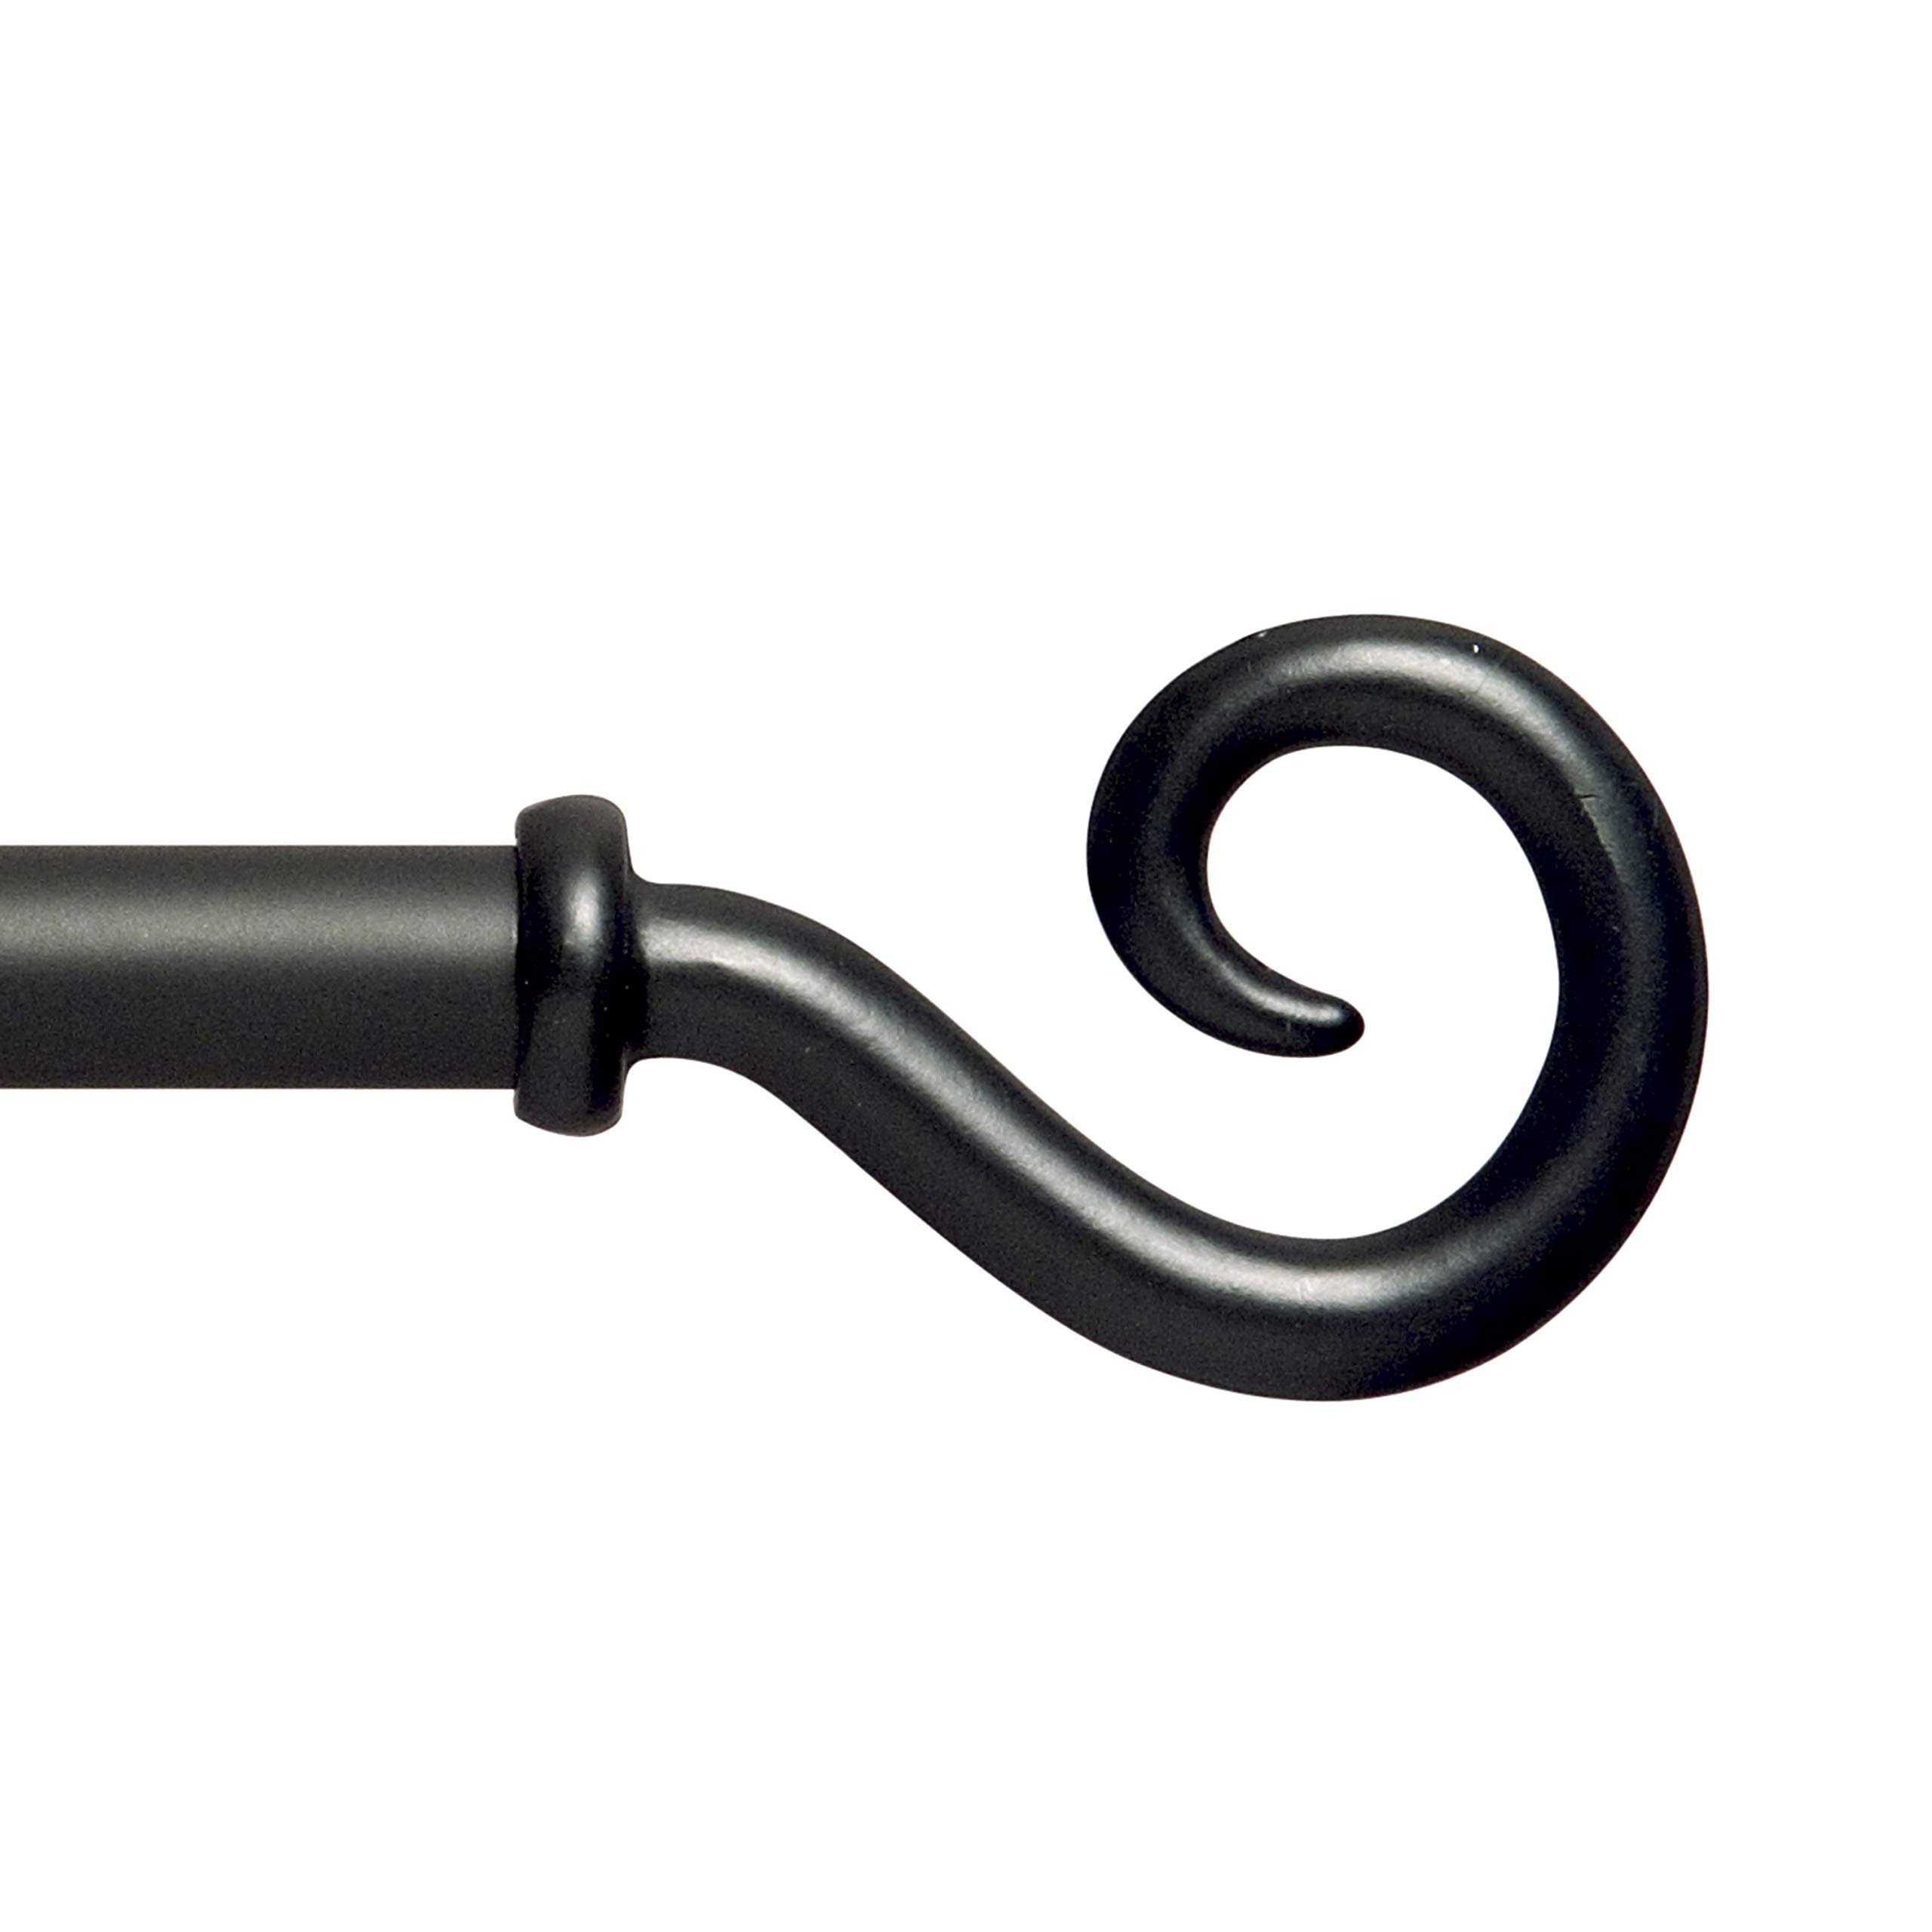 Kenney Medieval Hook Window Curtain Rod - Black, 48" to 86"